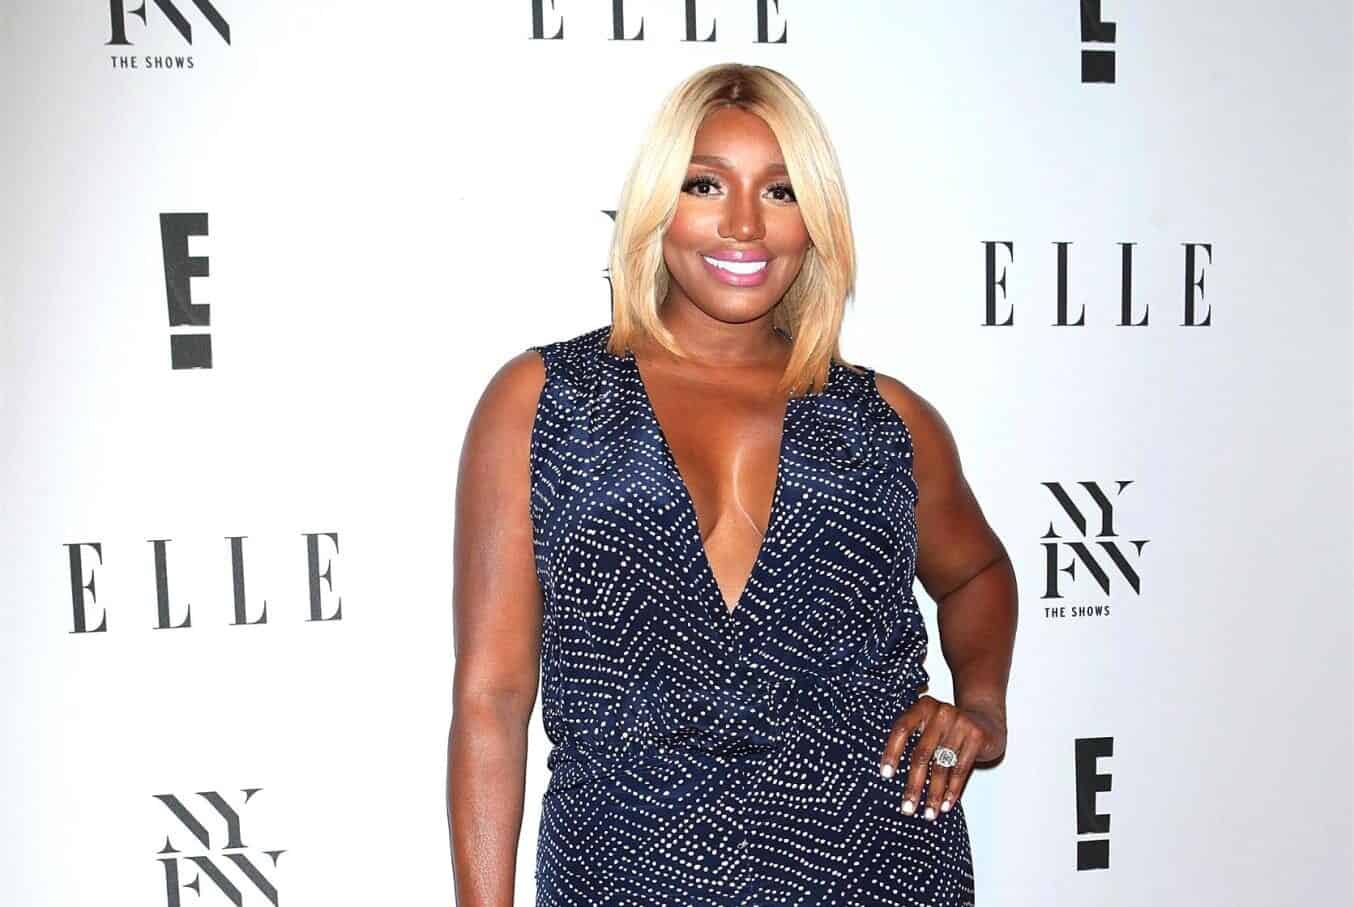 RHOA Alum Nene Leakes Calls for Fans to Boycott Bravo and Suggests She Was Unfairly Demoted, Claims Race Impacted Network's Decision After She Created Show and Built Franchise